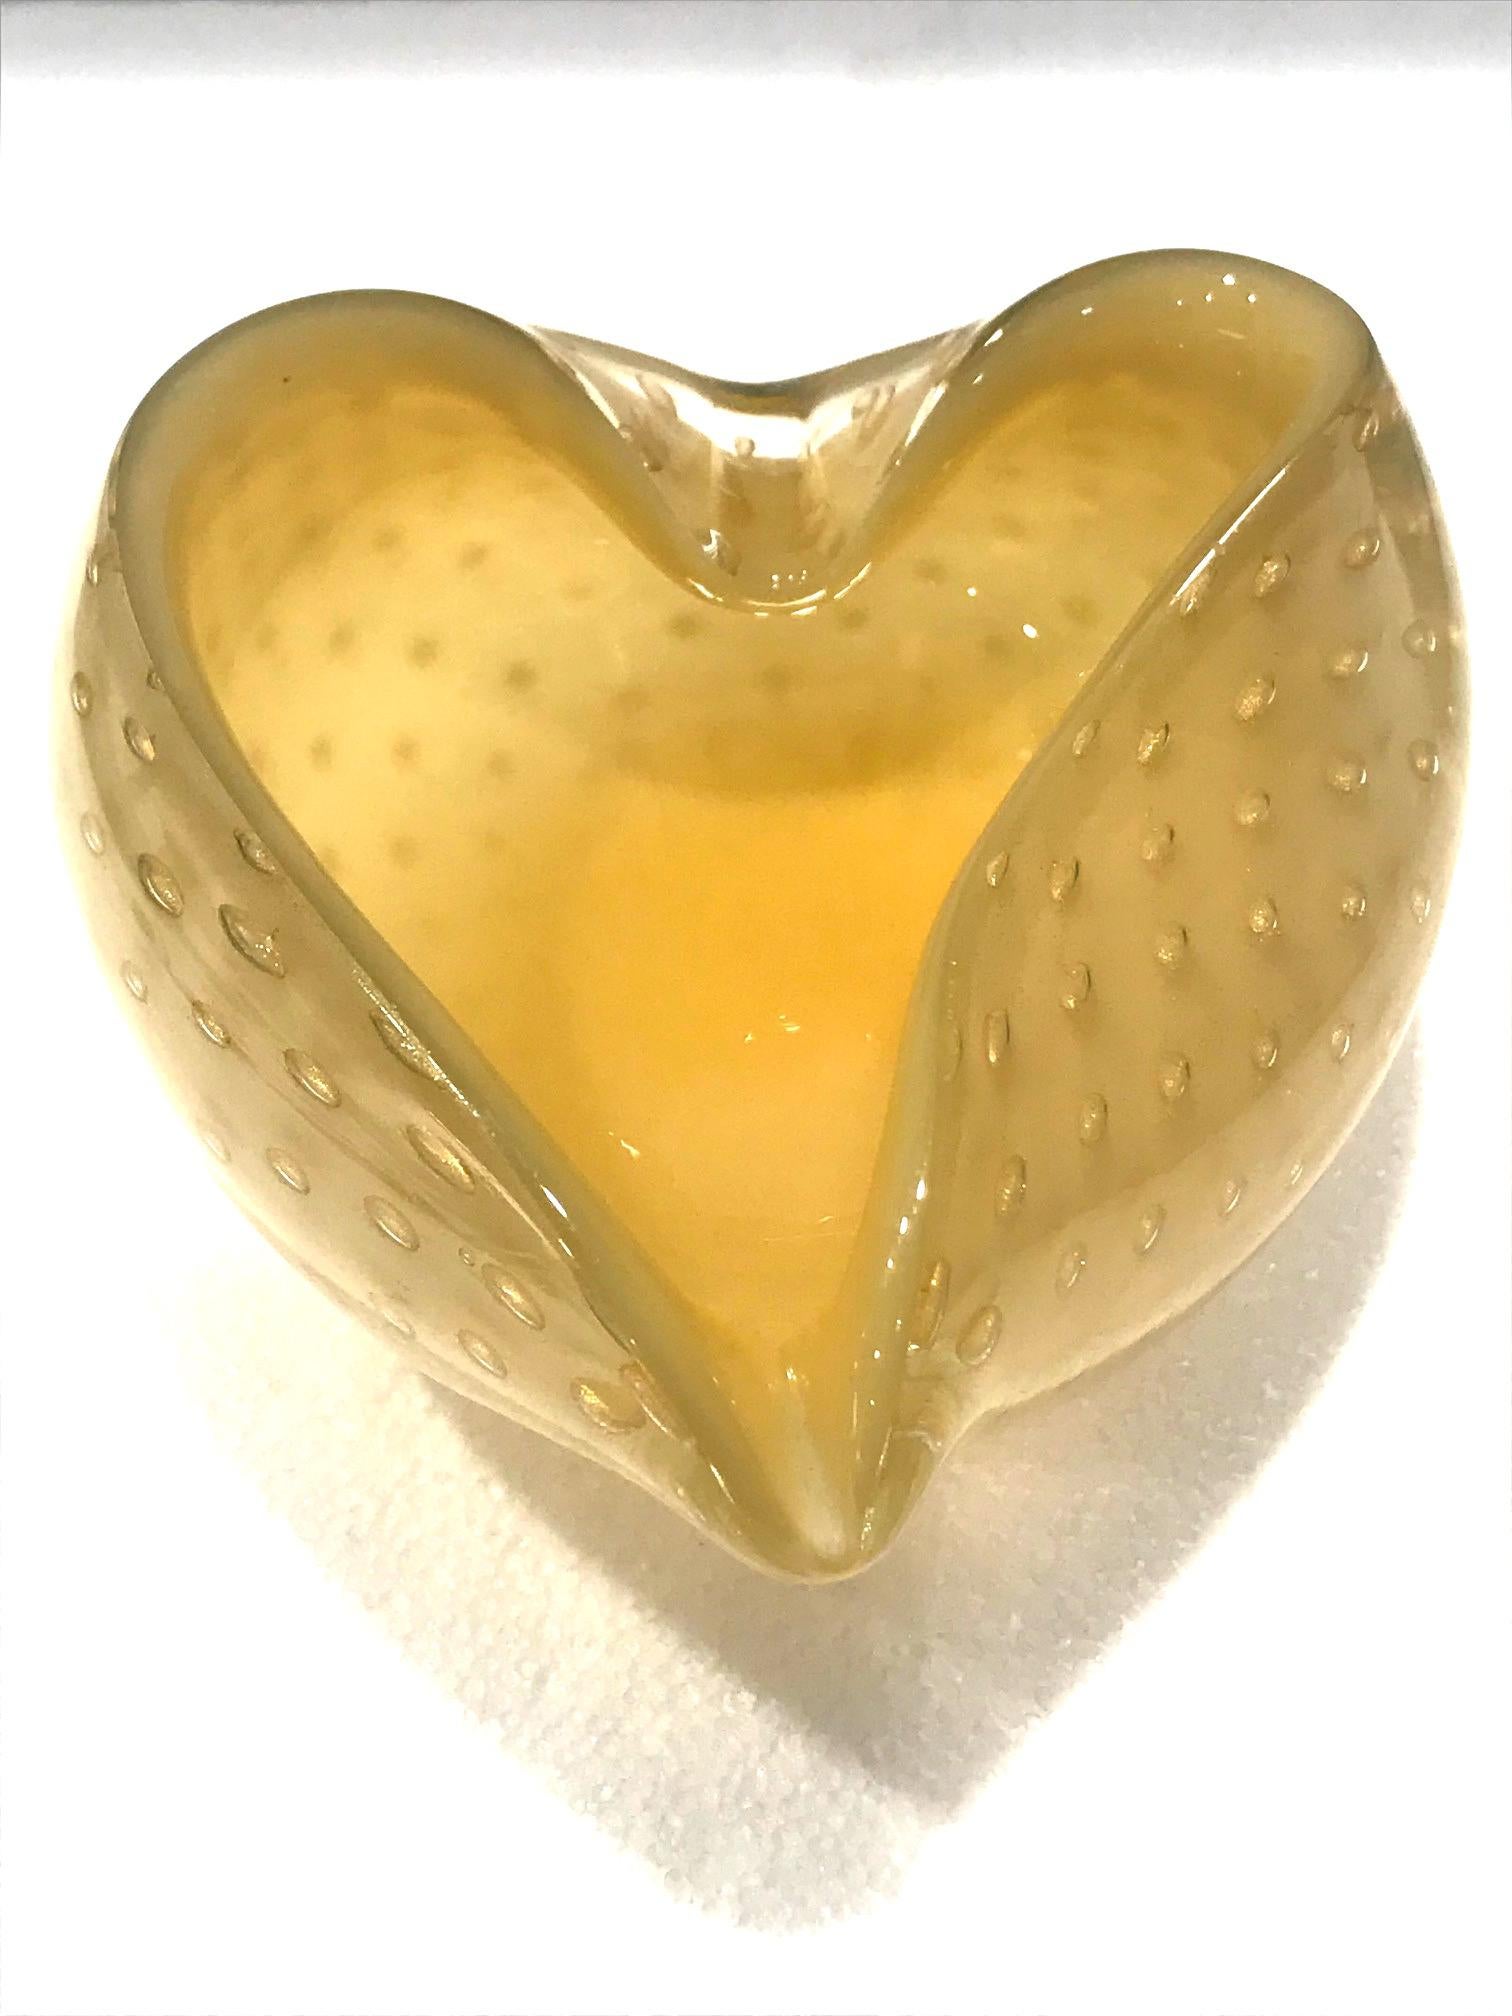 Mid-Century Modern handmade bowl with organic form in beige Murano glass with gold flecks, circa 1950. Features an abstract heart shape with pinched edges and controlled bubble details. Gorgeous from all angles and can be used as decorative object,